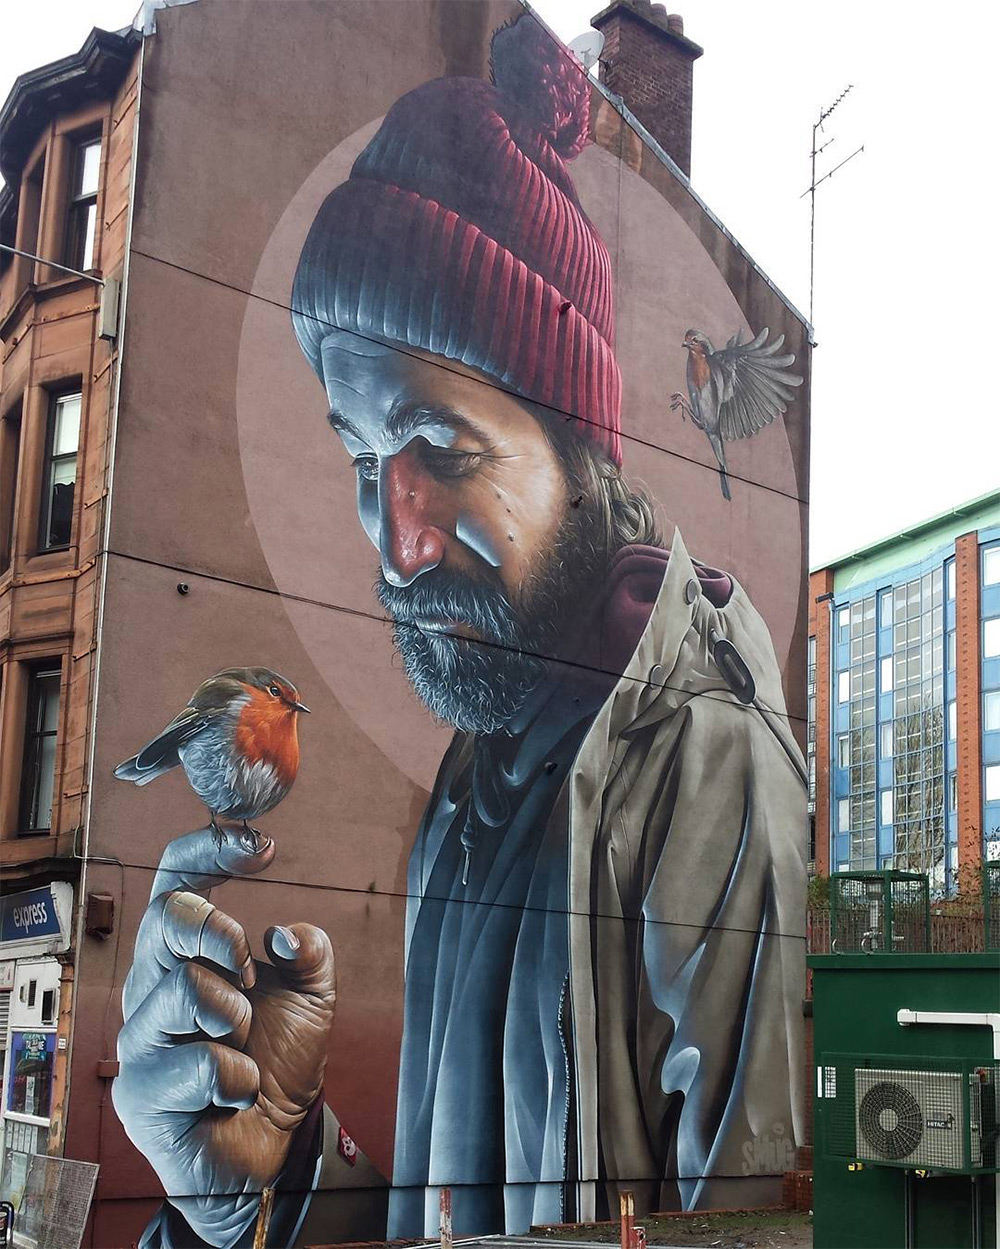 Mural by ‘Smug’ in Glasgow - thevandallist (1)